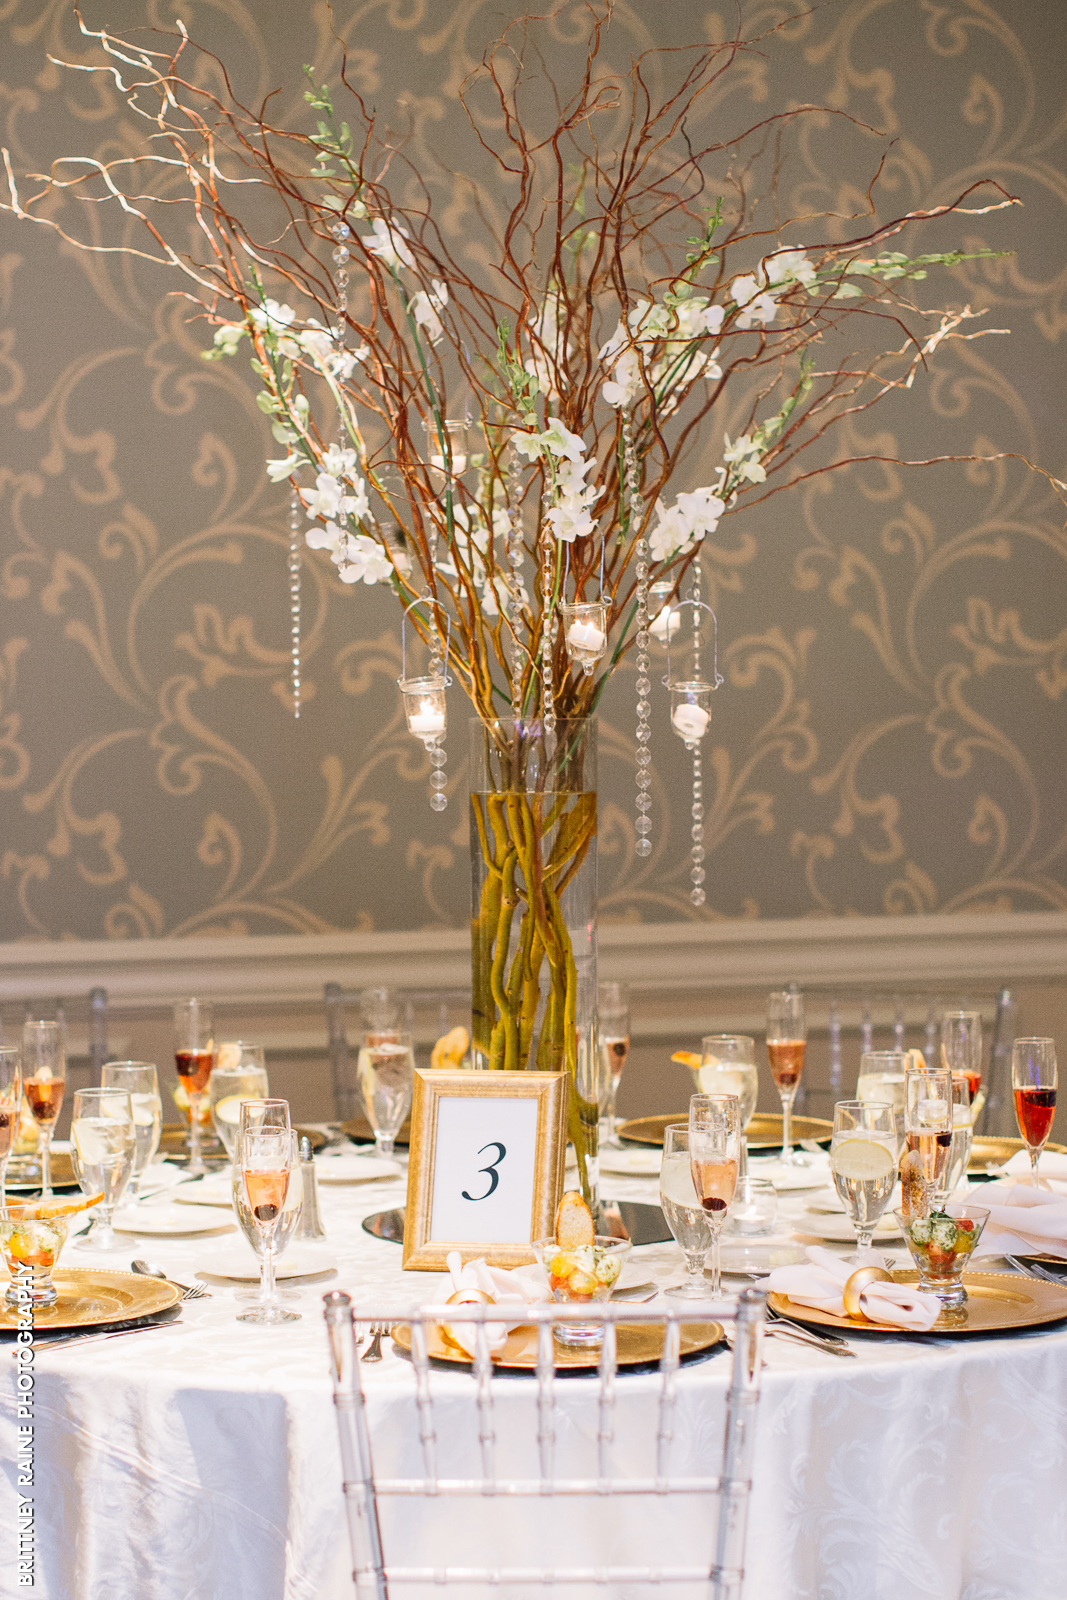 We love these rustic centerpieces the bride and groom brought in for their Emerald Ballroom wedding reception.